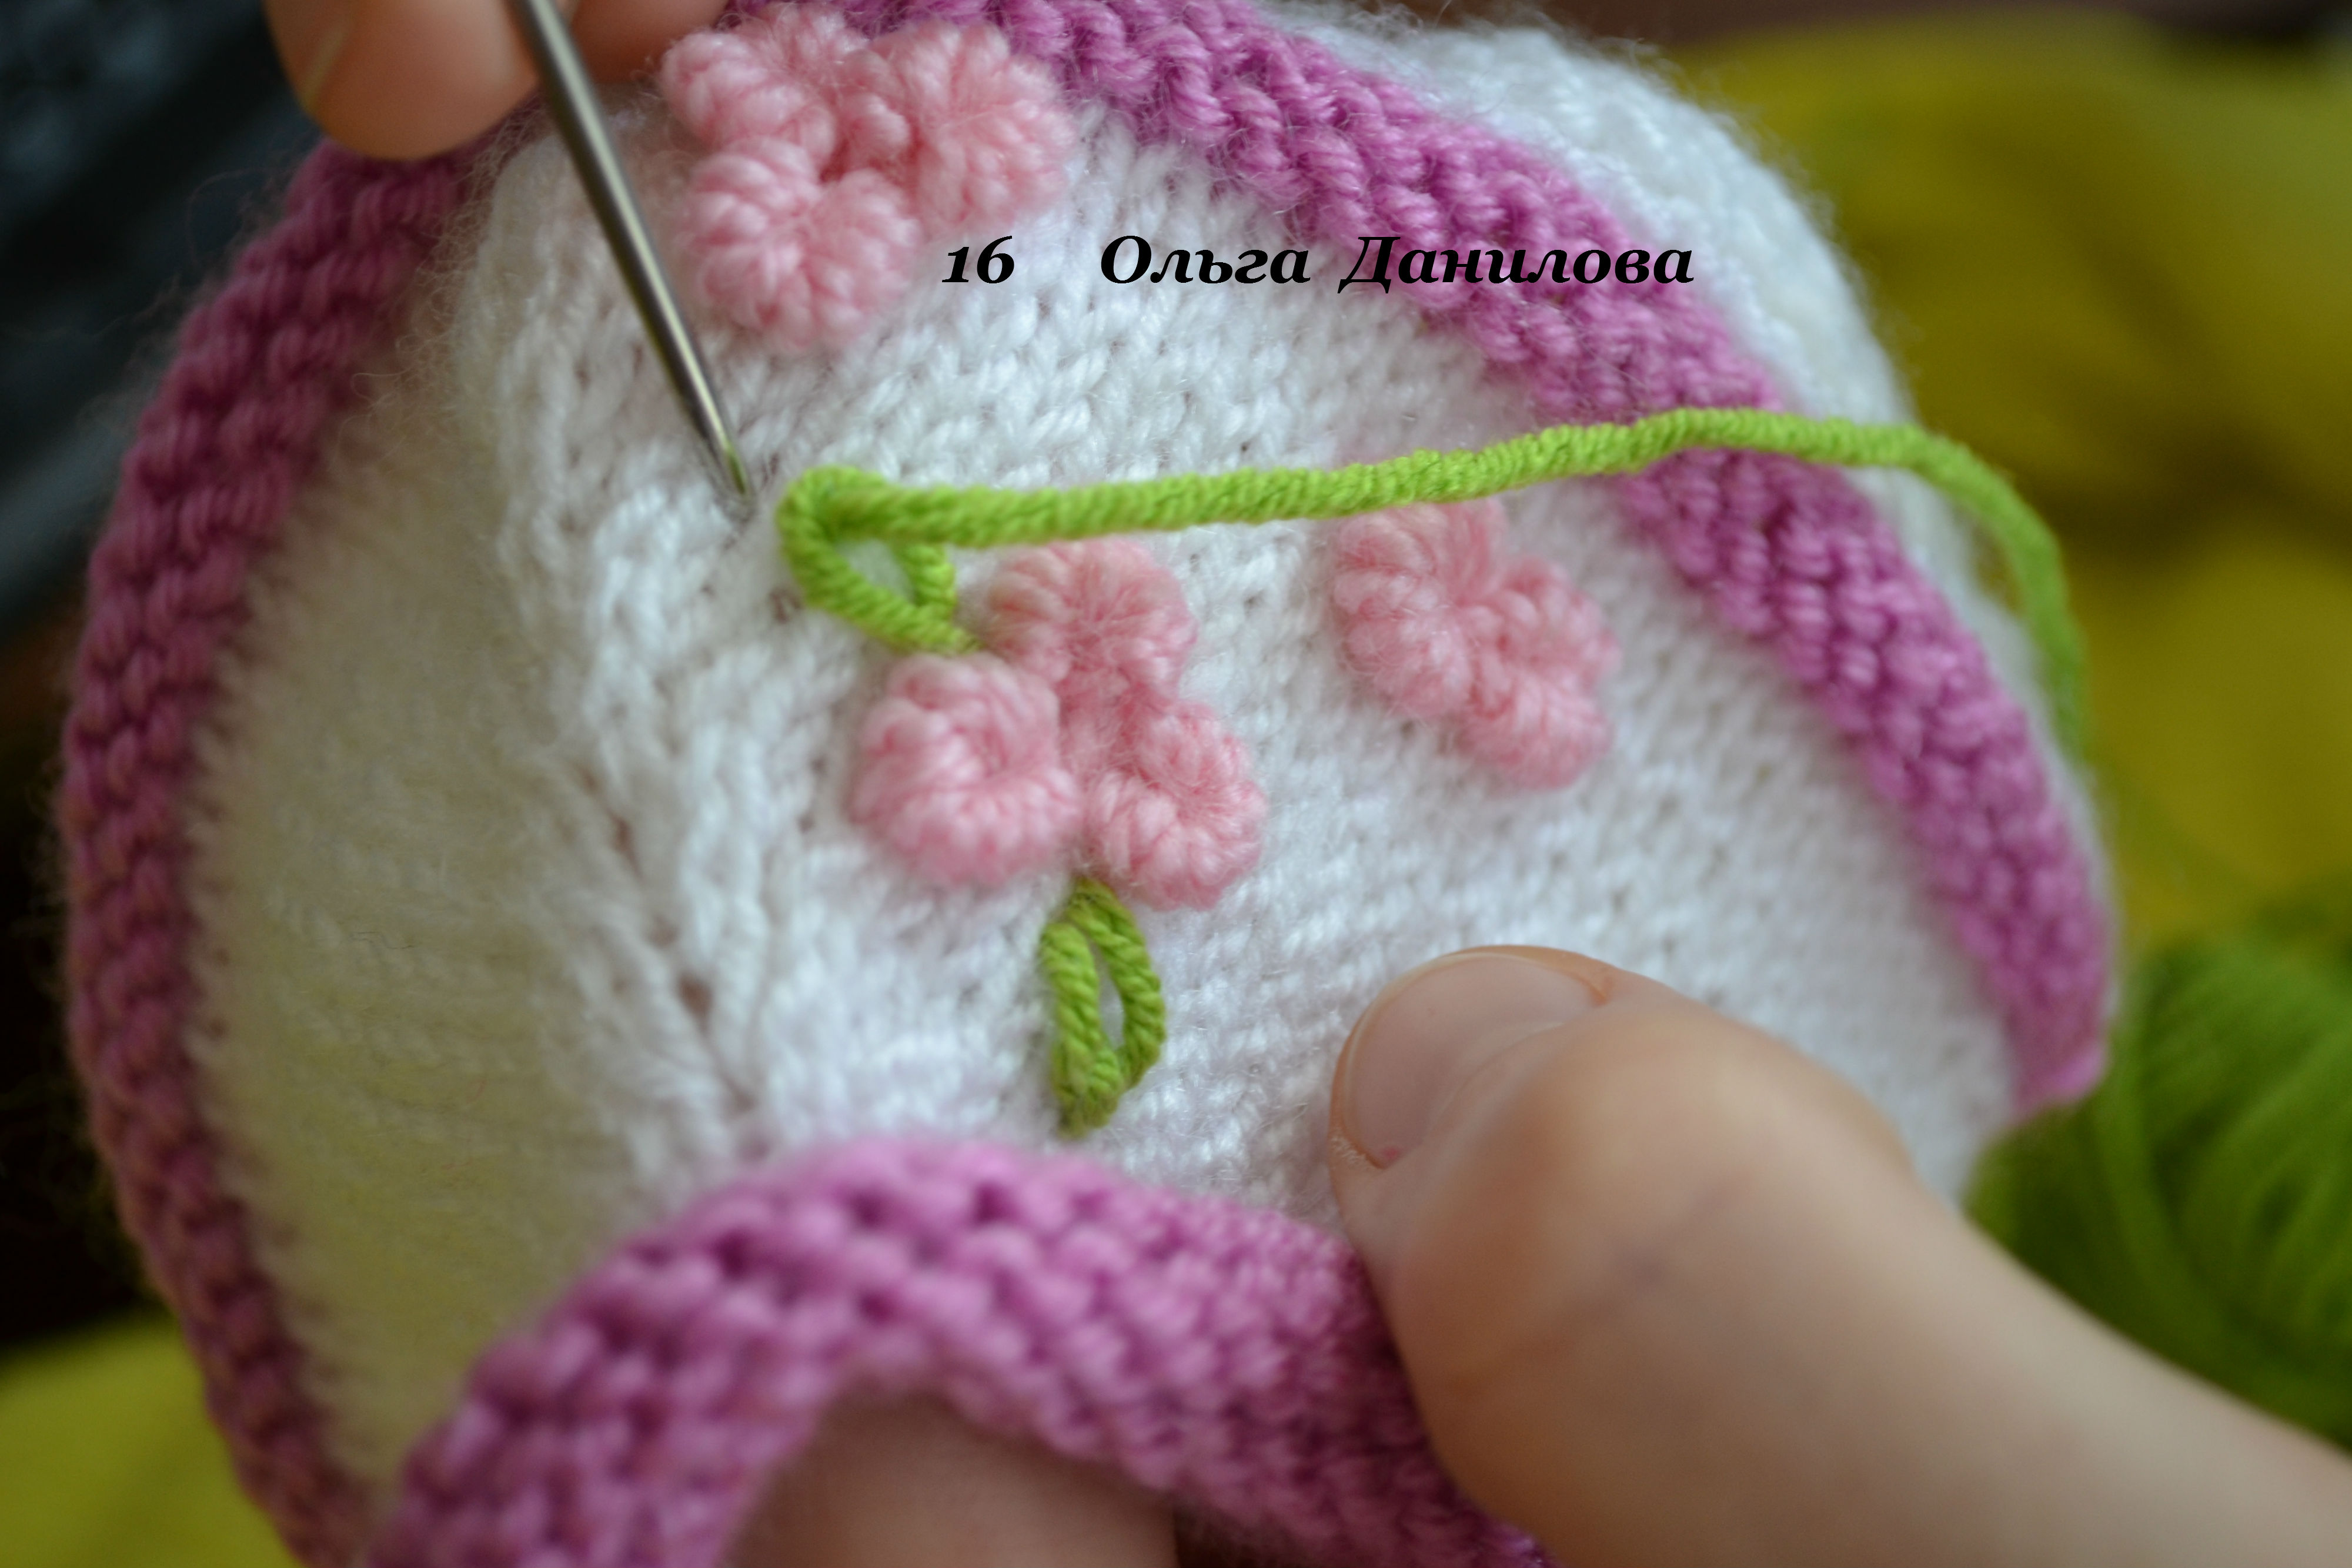 How-to-Make-Pretty-Knitted-Baby-Booties-18.jpg